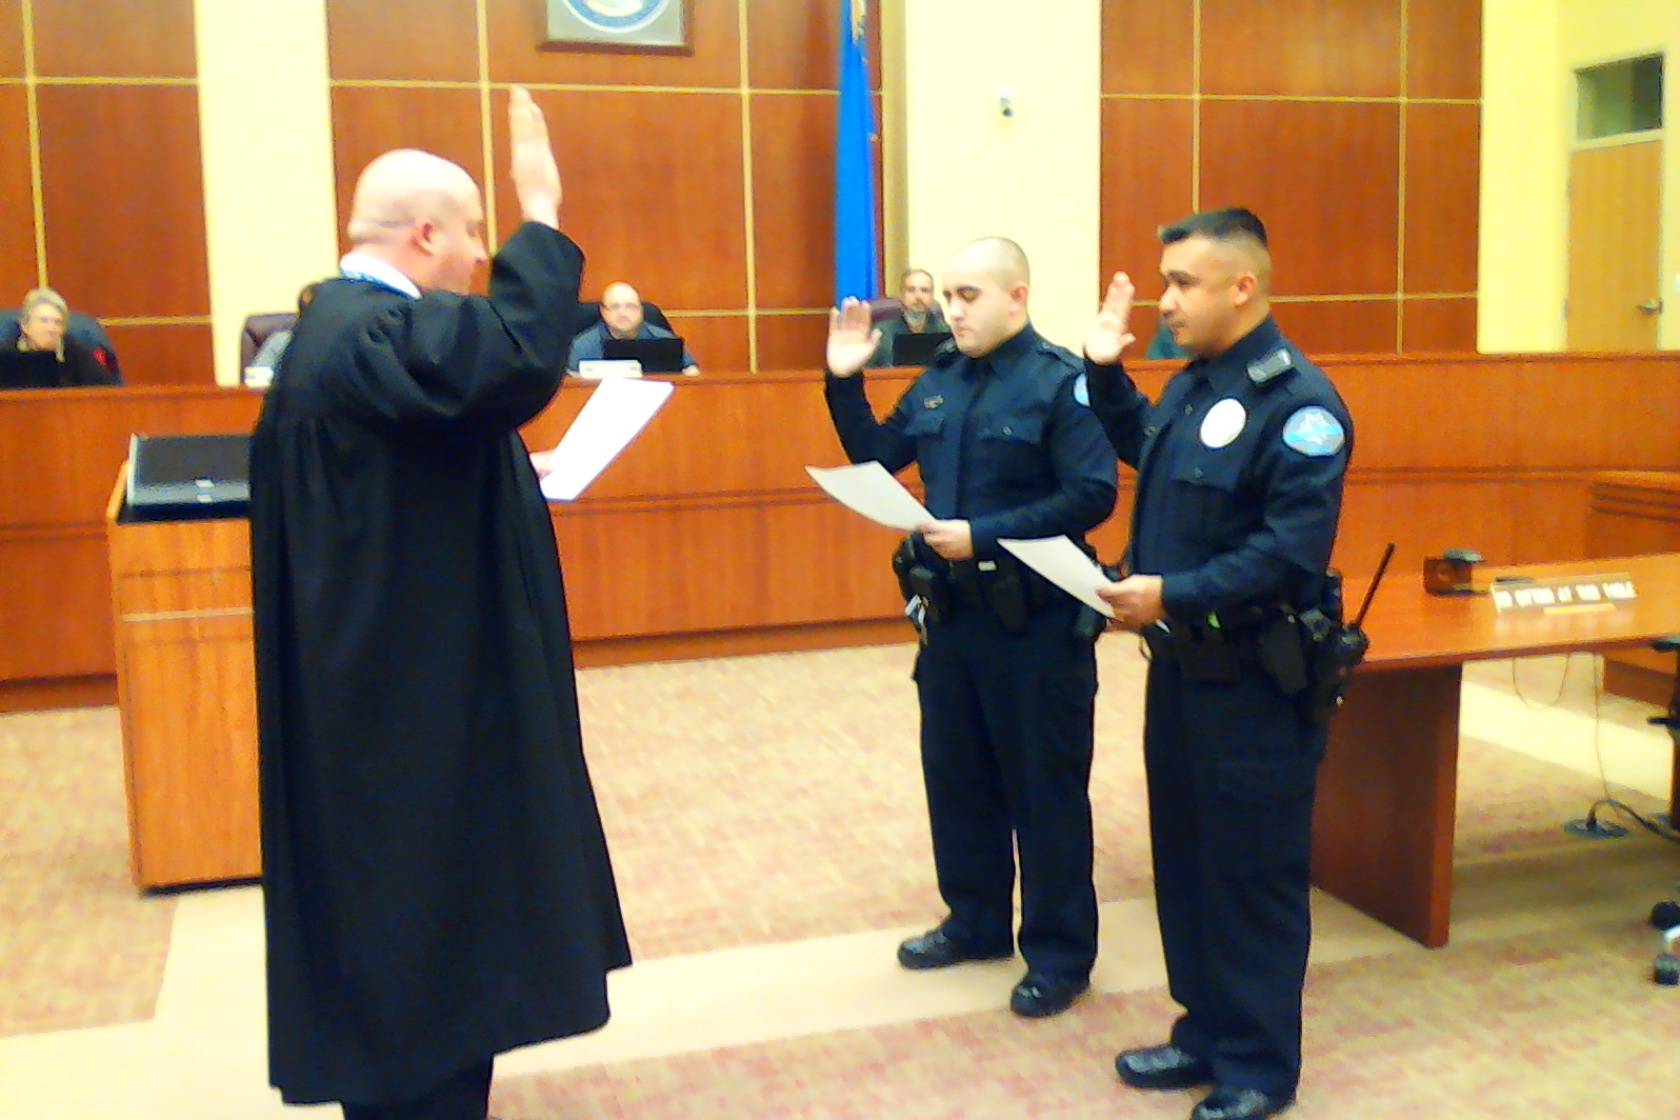 The two police officers sworn into the West Wendover Police, Fernando Uribe, and Miguel Pantelakis, here by Judge Brian Boatman (Photo High Desert Advocate).